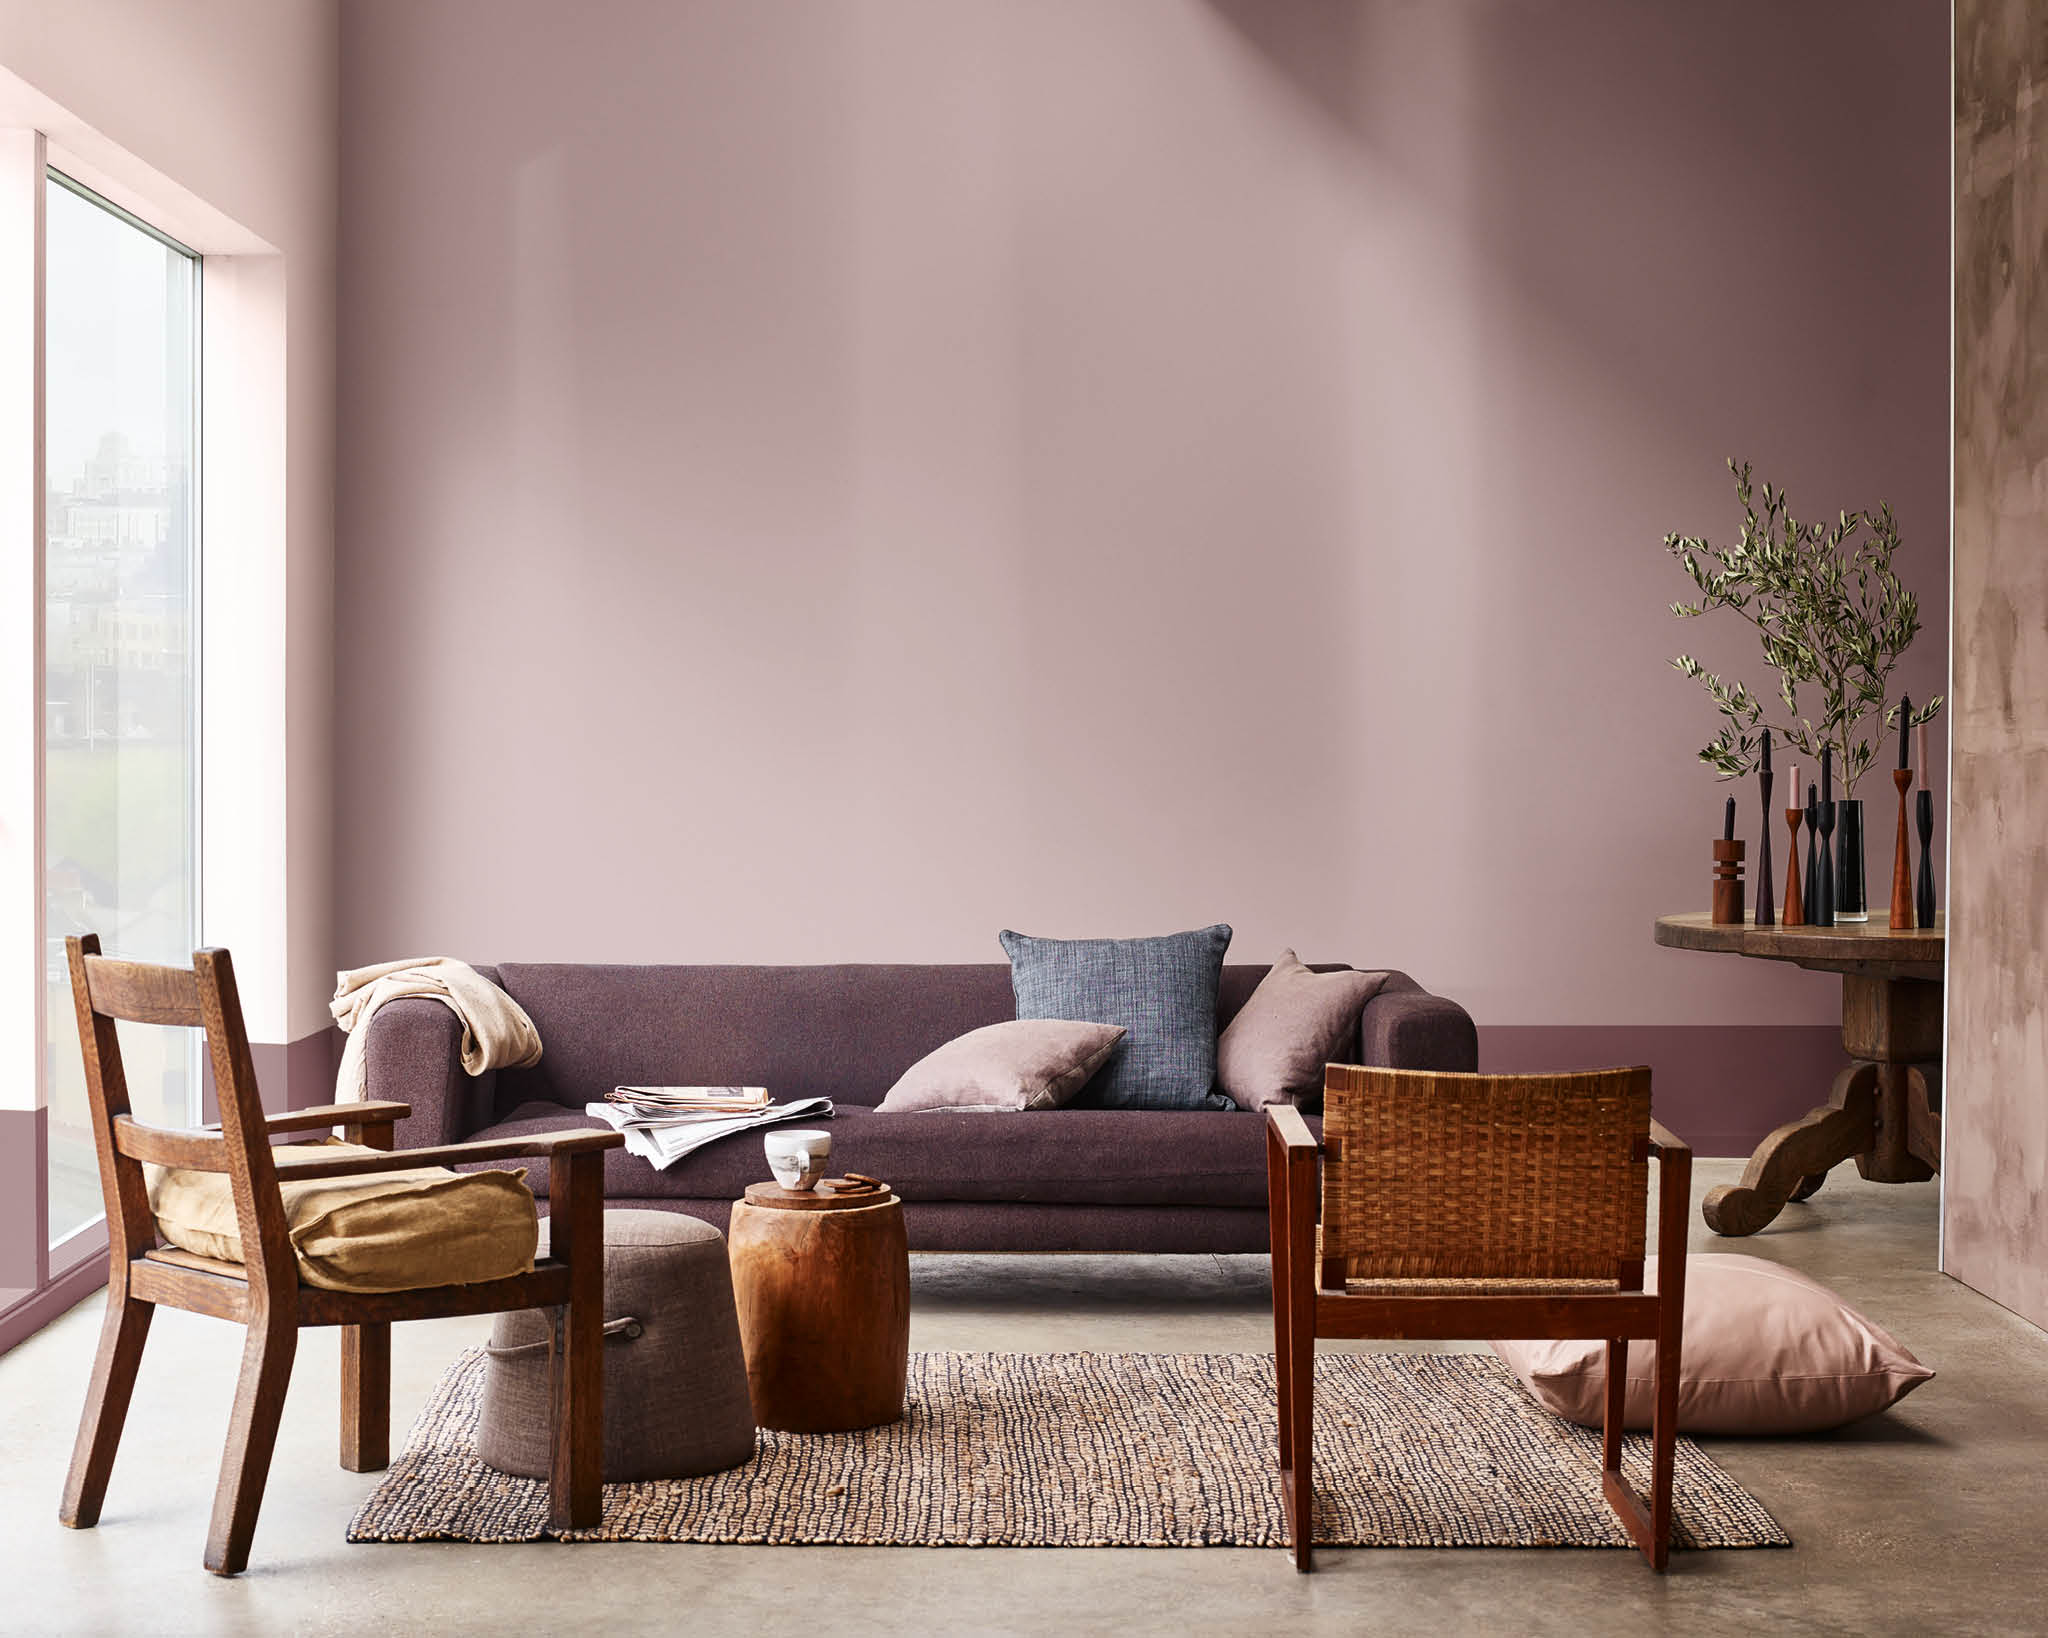 All you need to know about Dulux Colour of the Year 2018 | Dulux Arabia